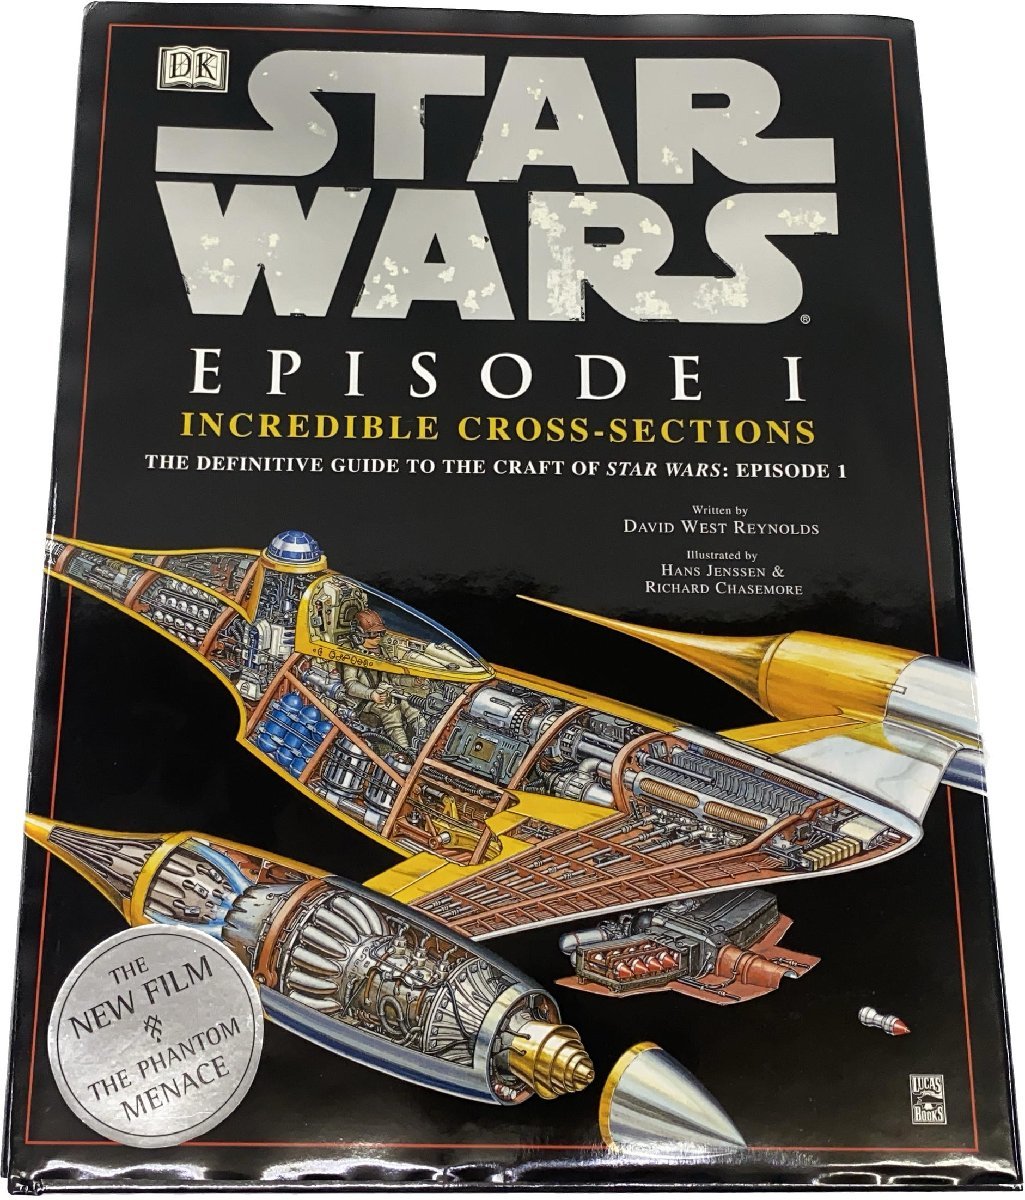 DP PUBLISHING STAR WARS EPISODE I INCREDIBLE CROSS-SECTIONS